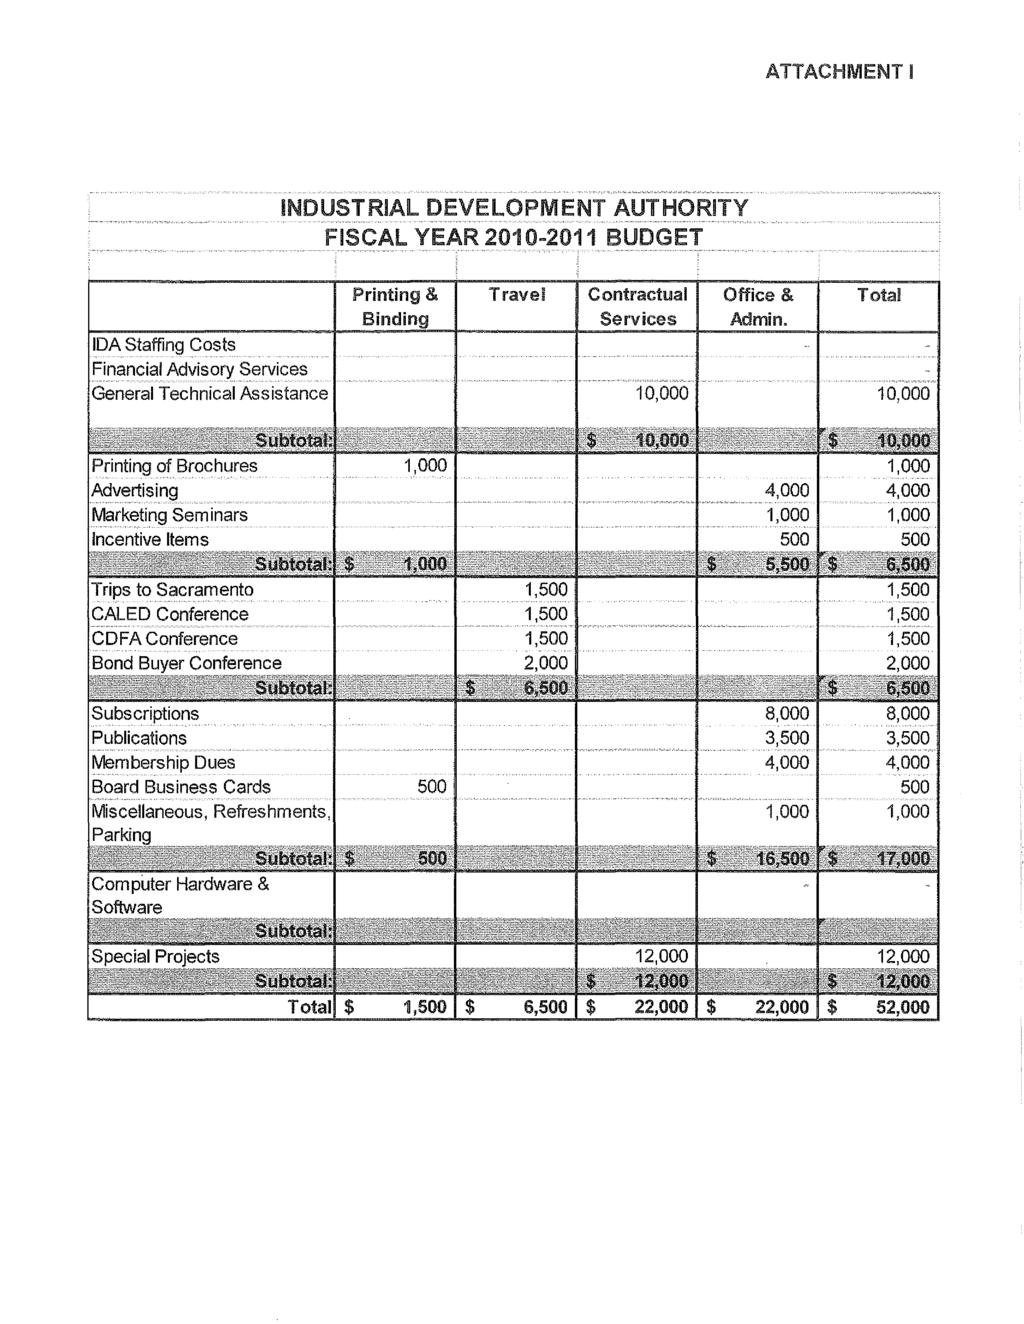 ATTACHMENT I INDUSTRIAL DEVELOPMENT AUTHORITY FISCAL YEAR 2010-2011 BUDGET IDA Staffing Costs Financial Advisory rs,ervices.